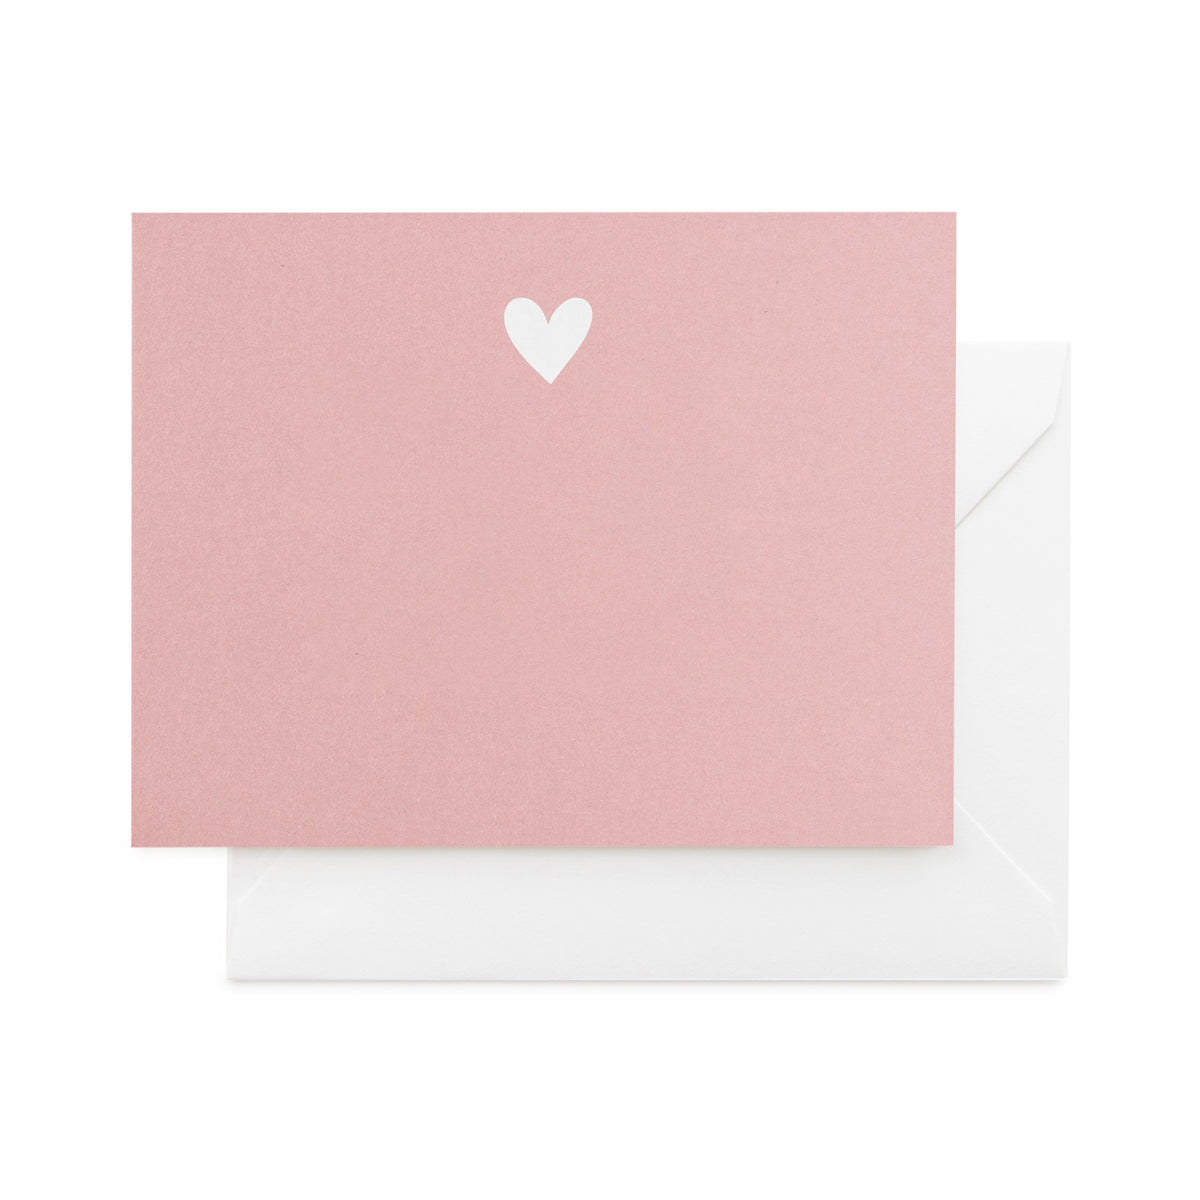 Dusty rose note card set with white heart